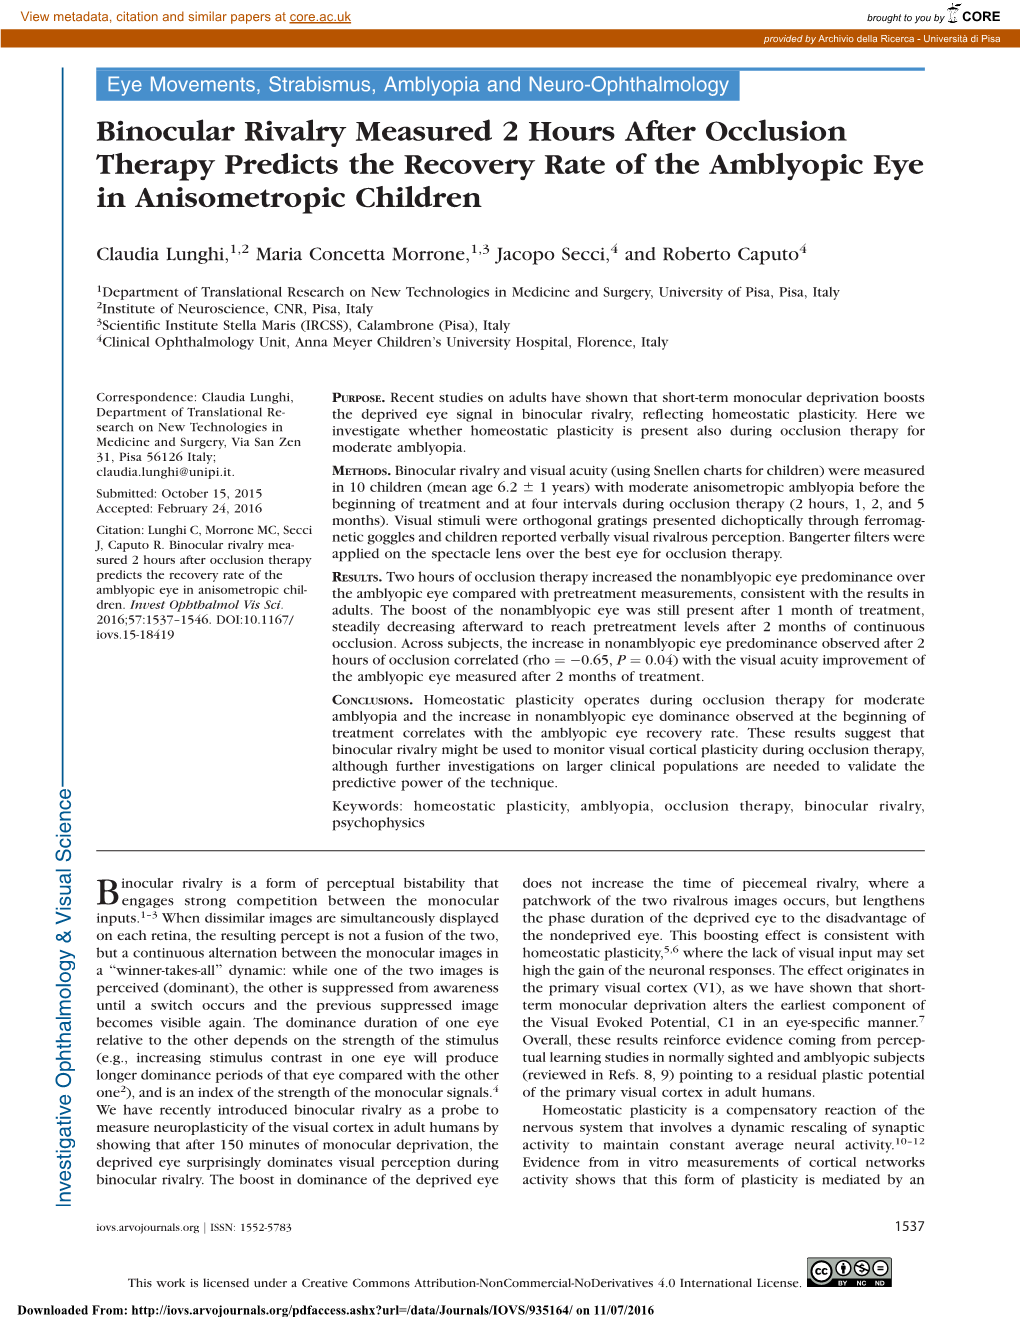 Binocular Rivalry Measured 2 Hours After Occlusion Therapy Predicts the Recovery Rate of the Amblyopic Eye in Anisometropic Children